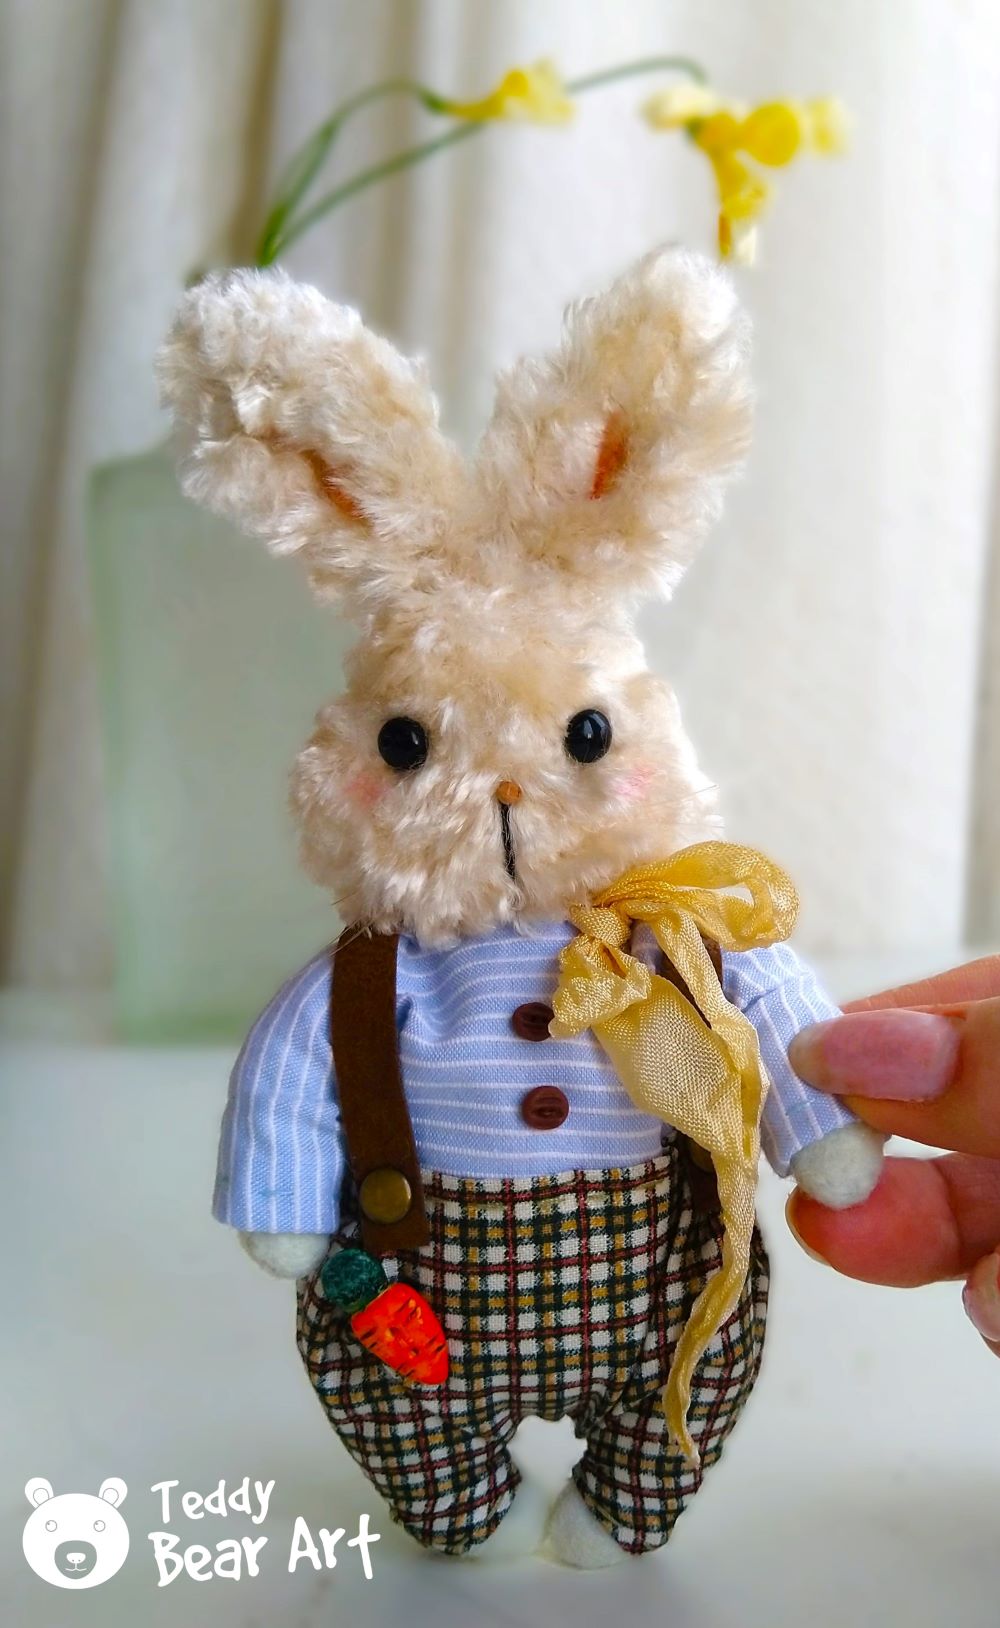 Easy Stuffed Bunny Sewing Pattern: Complete Guide with Outfit Patterns Included